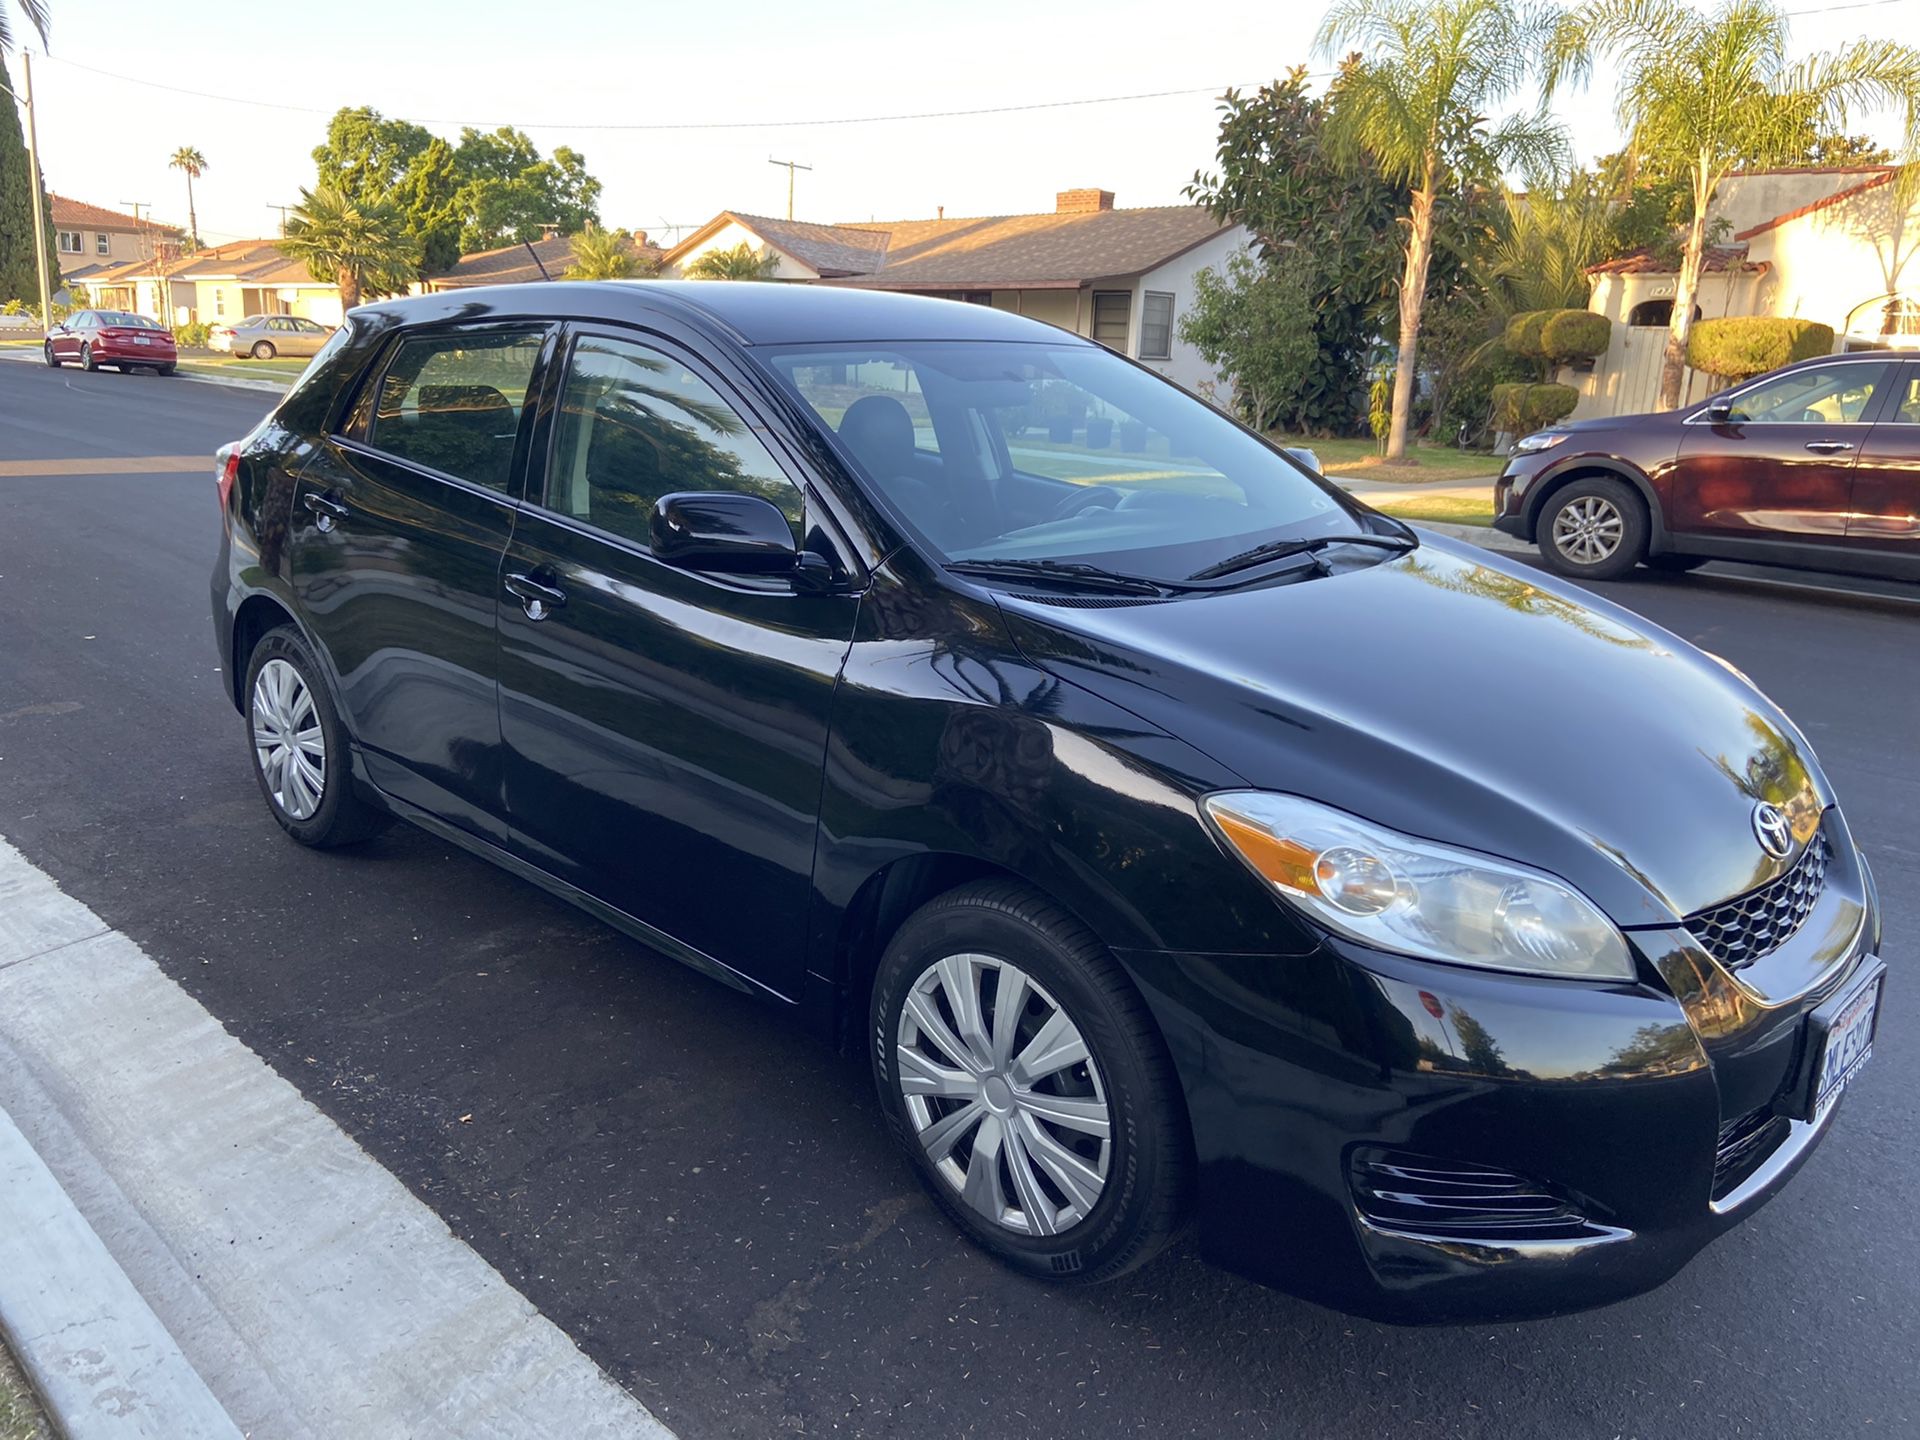 2010 Toyota Matrix (COROLLA) 1.8L SMOG DONE 4 Cylinder TAGS 2021 2nd OWNER RUNNING GREAT Automatic MILES 160,xxx SPACIOUS ECONOMIC TRANSPORTATION